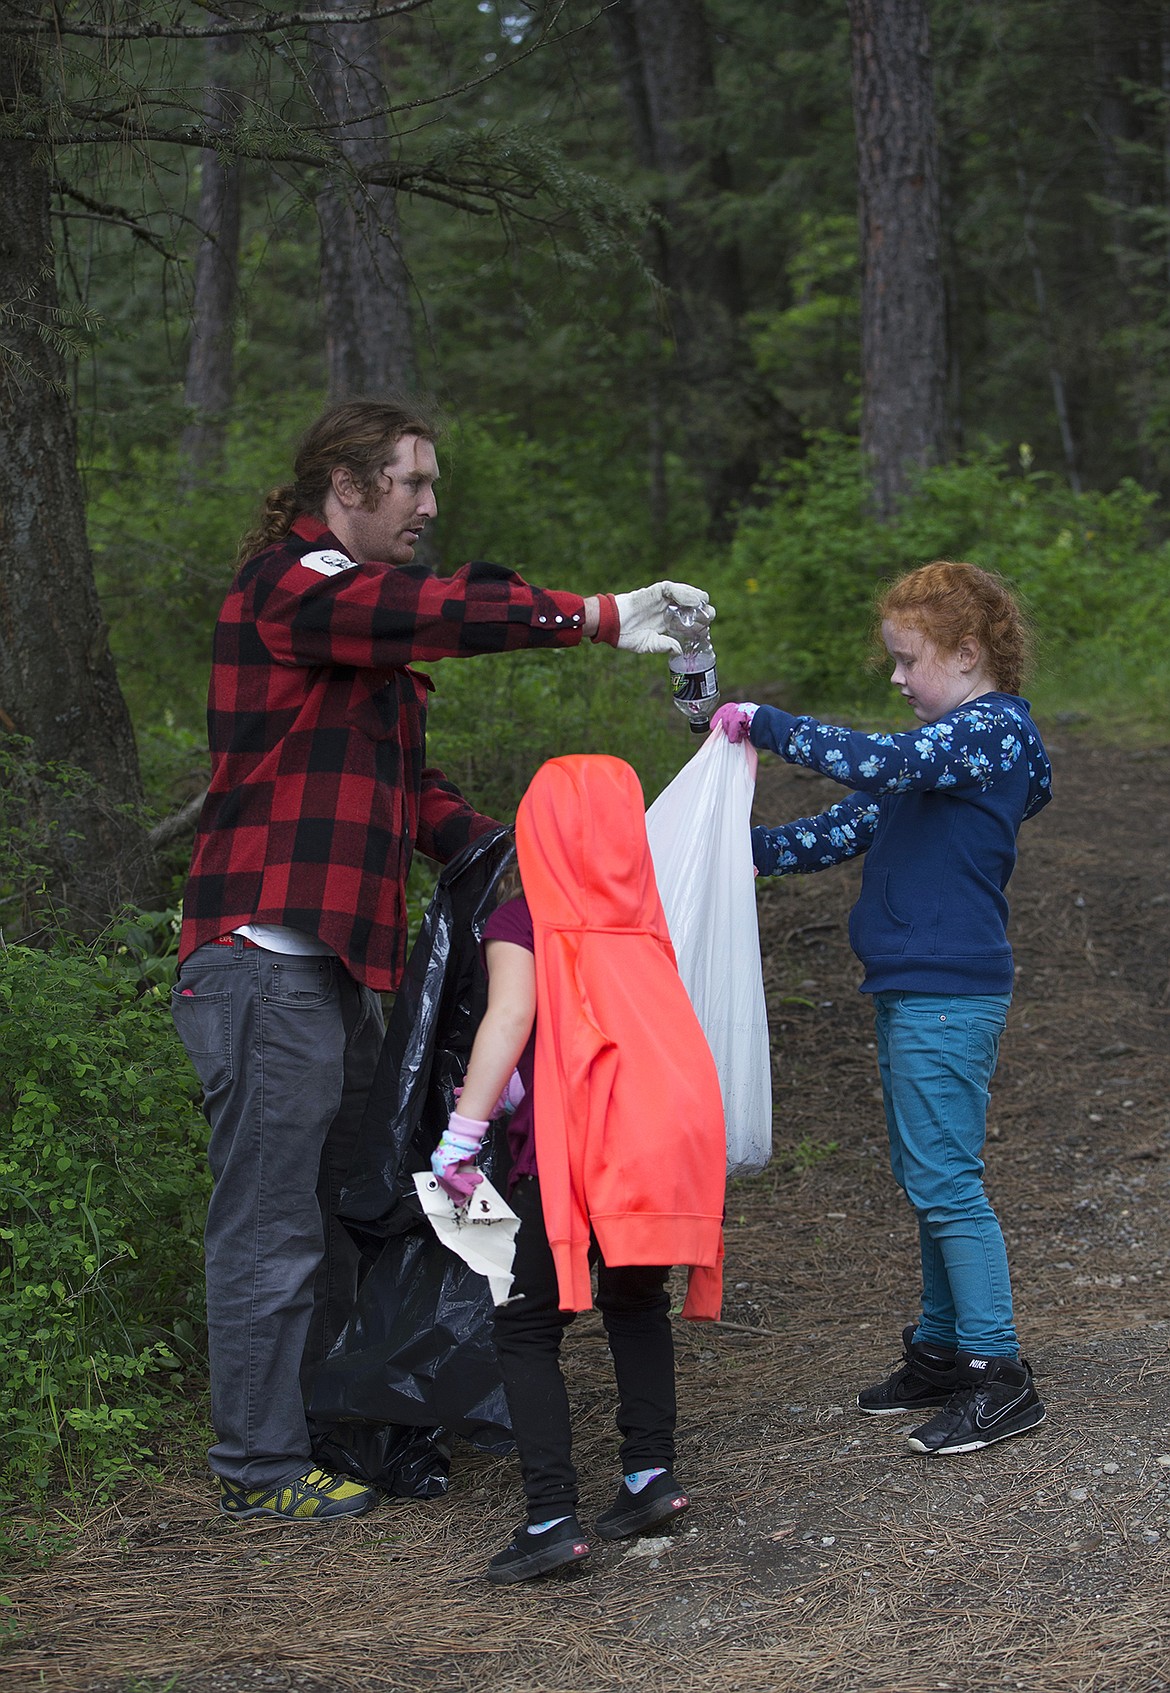 LISA JAMES/Press
Local environmental activist Dylan Stiegemeier disposes of glass recyclables as John Brown Elementary School first-graders Hazel Nutterville, right, and Casey Slokum, hold the bag during a litter cleanup in the woods near their school on May 18.